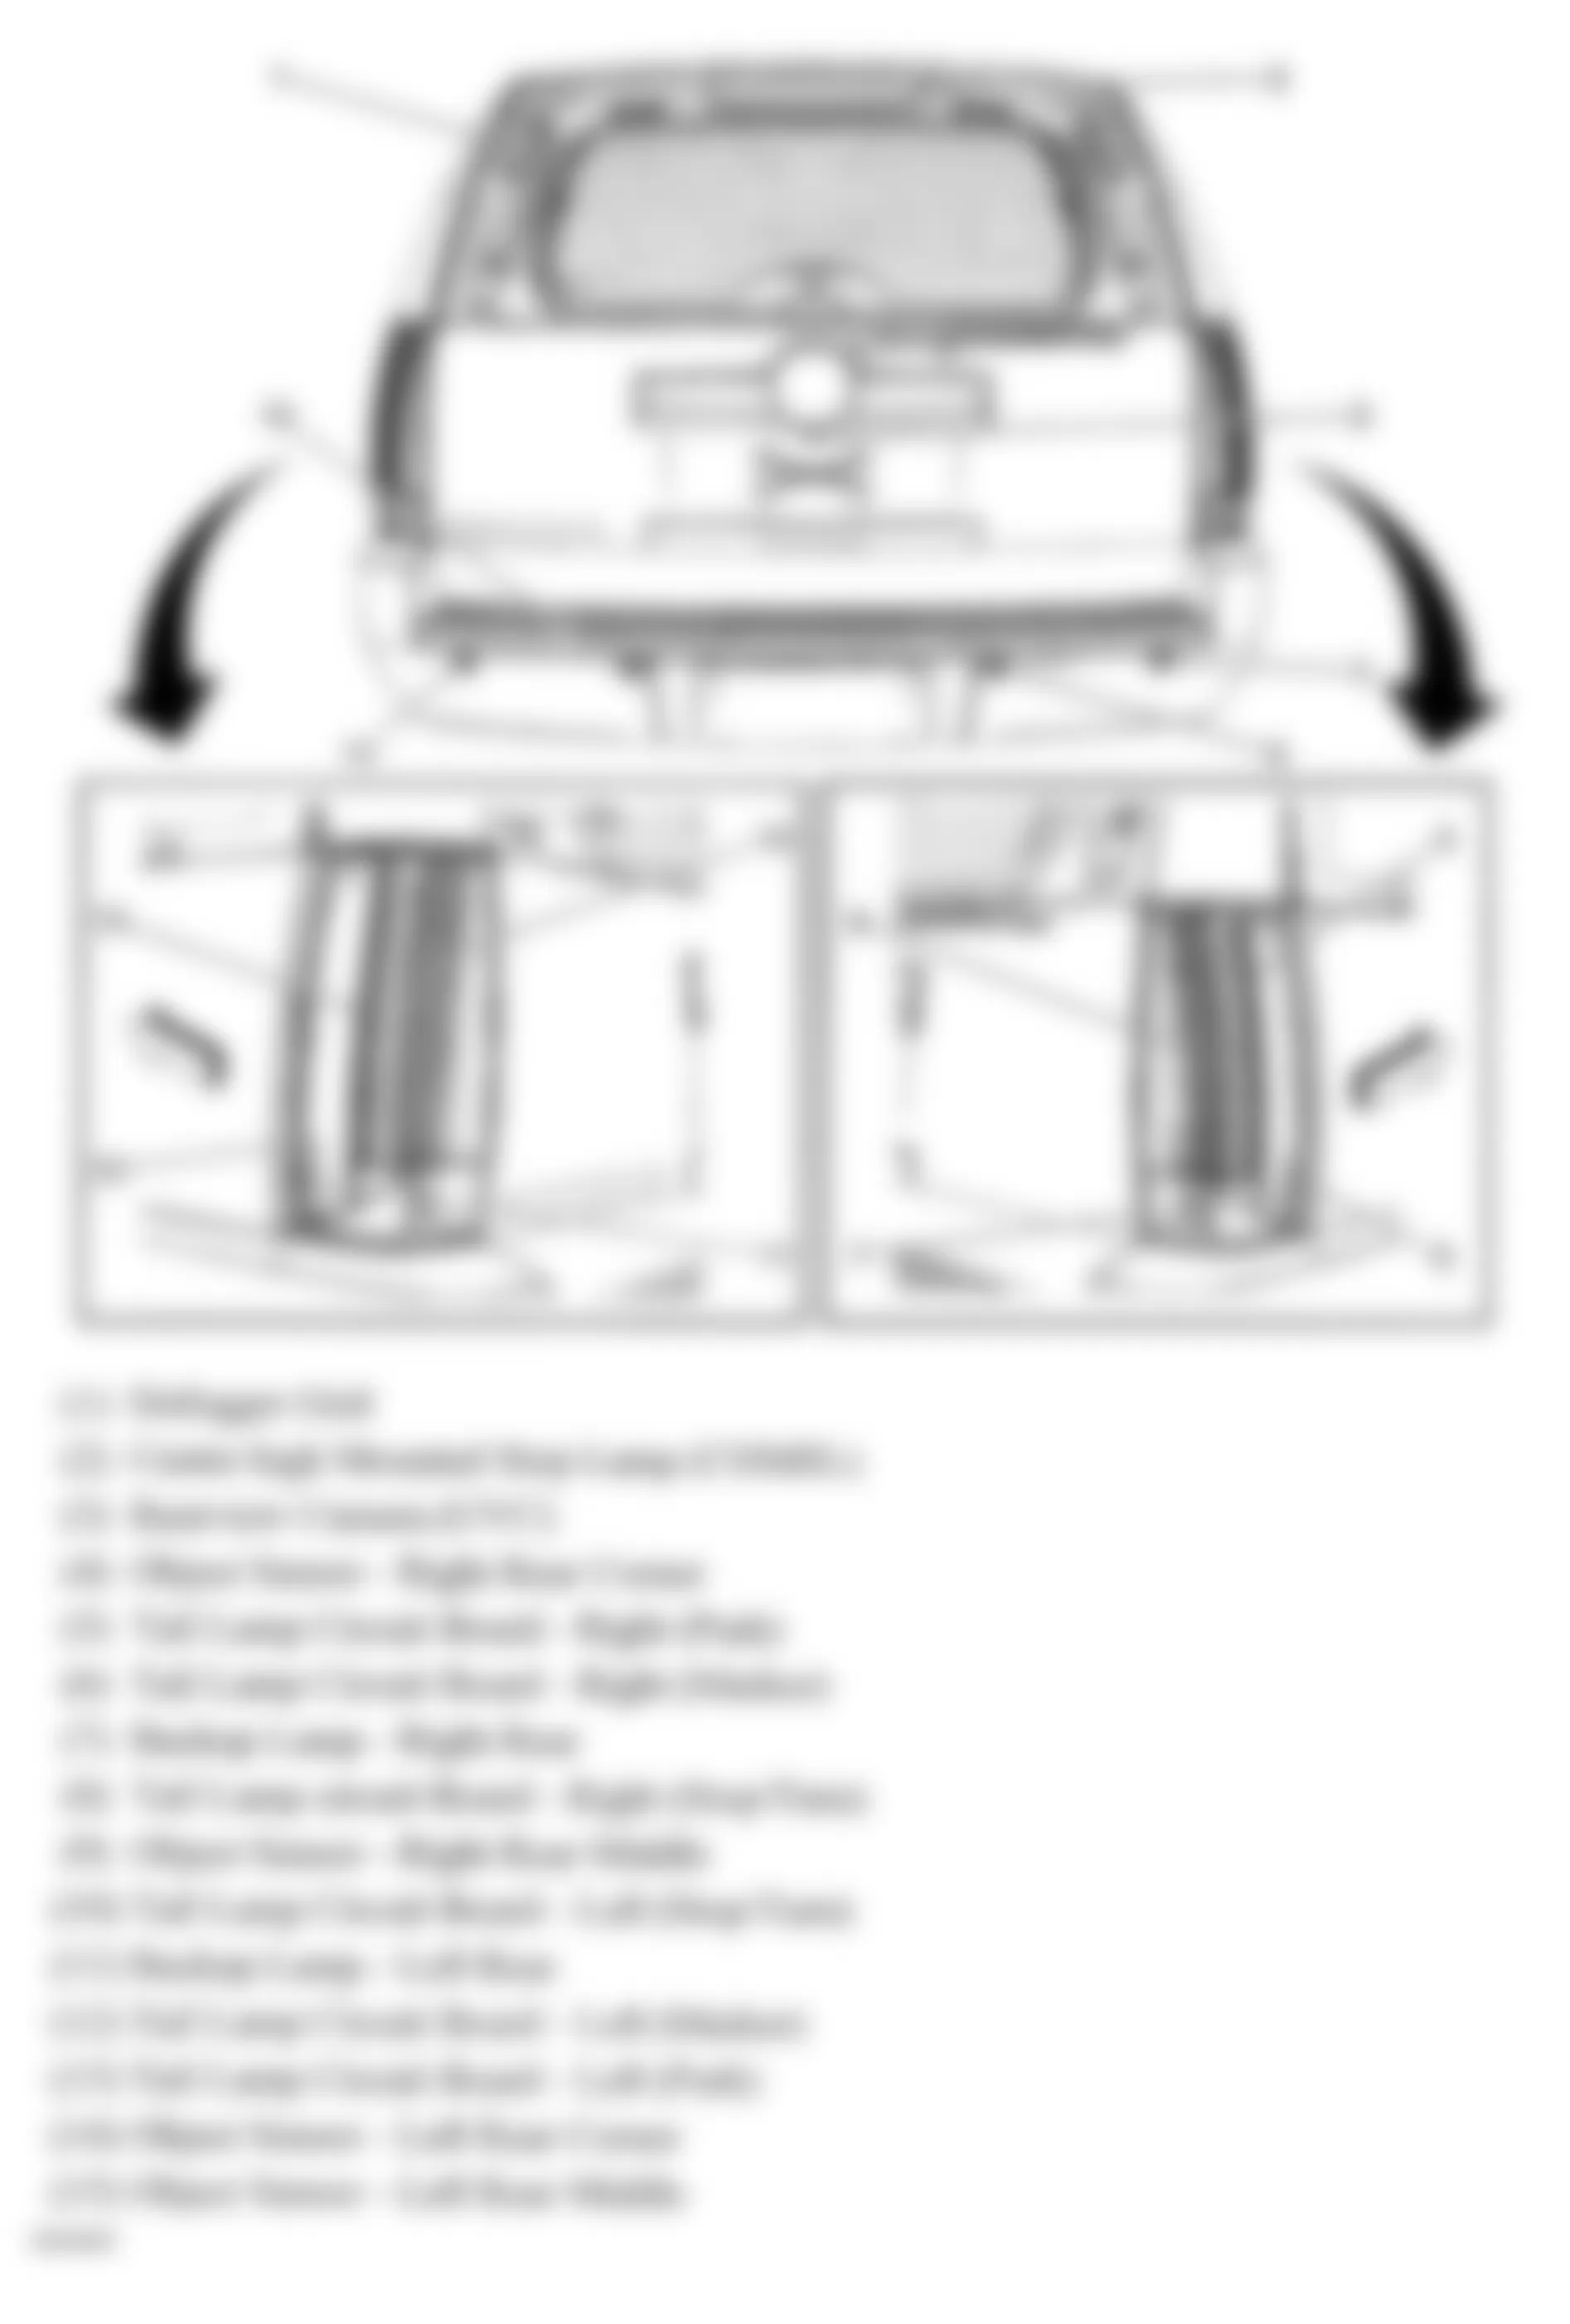 GMC Yukon XL C1500 2008 - Component Locations -  Rear Of Vehicle (Tahoe & Escalade W/One Piece Liftgate)